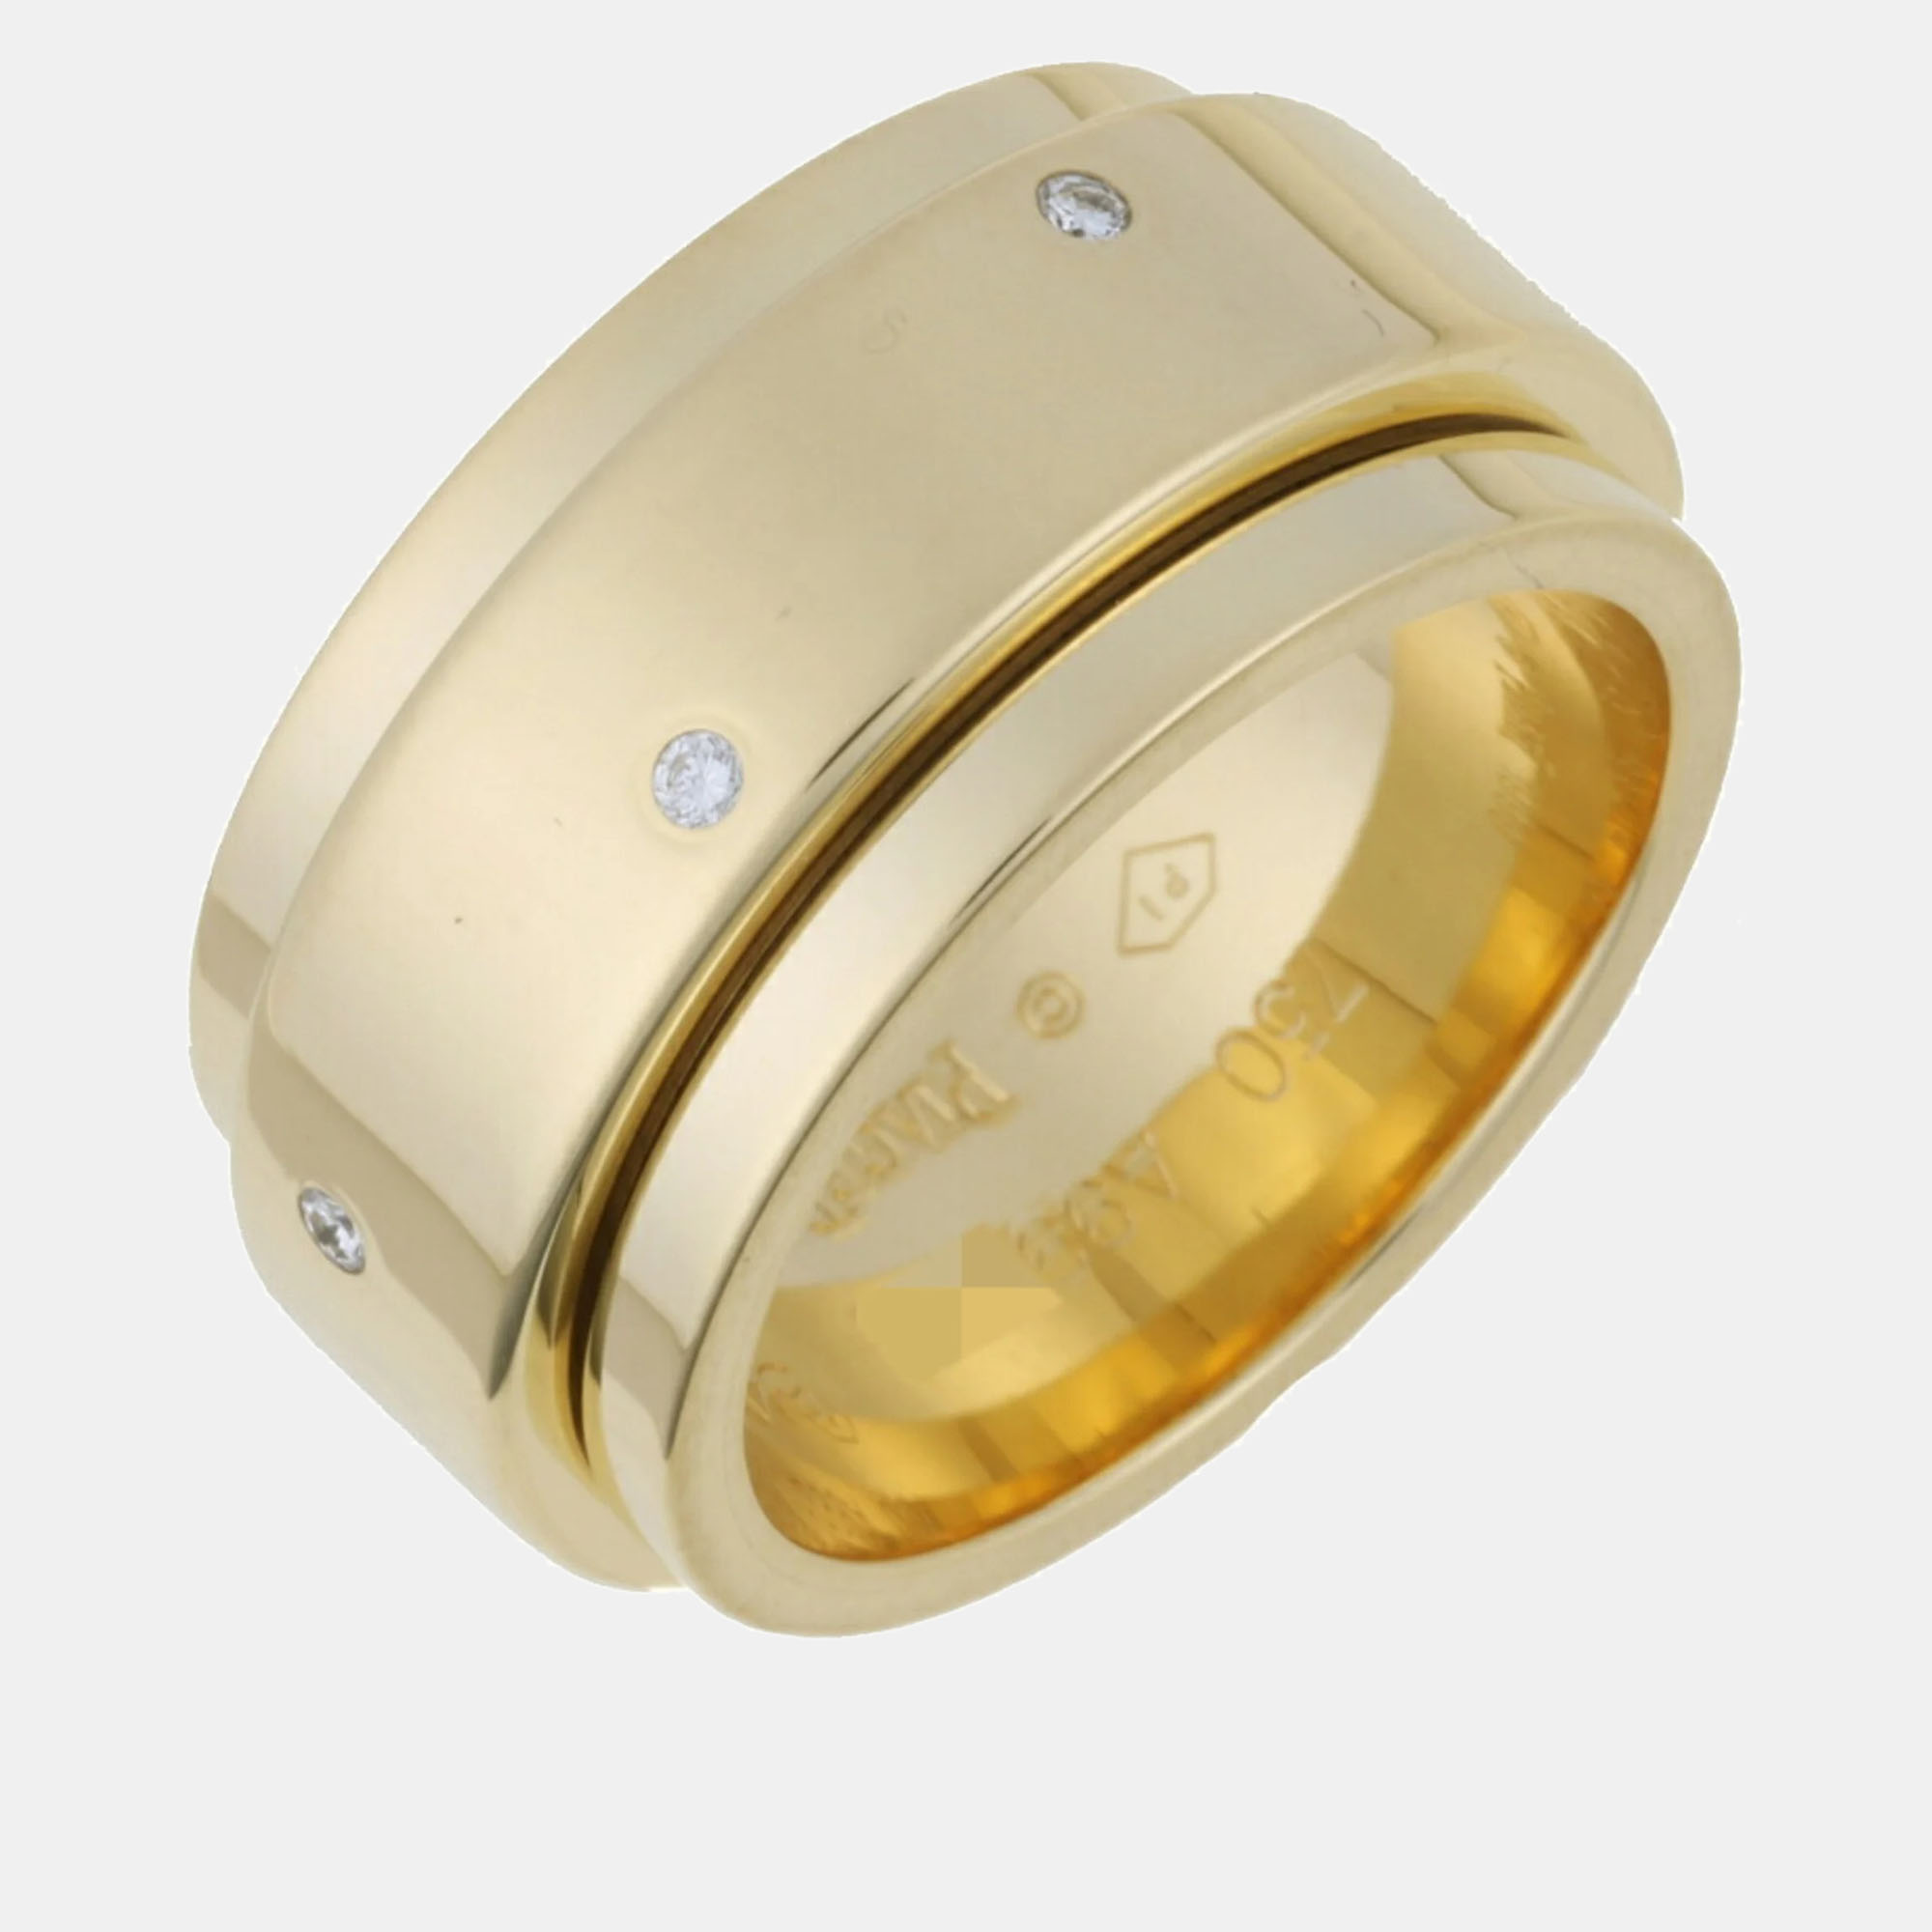 Pre-owned Piaget 18k Yellow Gold And Diamond Possession Band Ring Eu 54